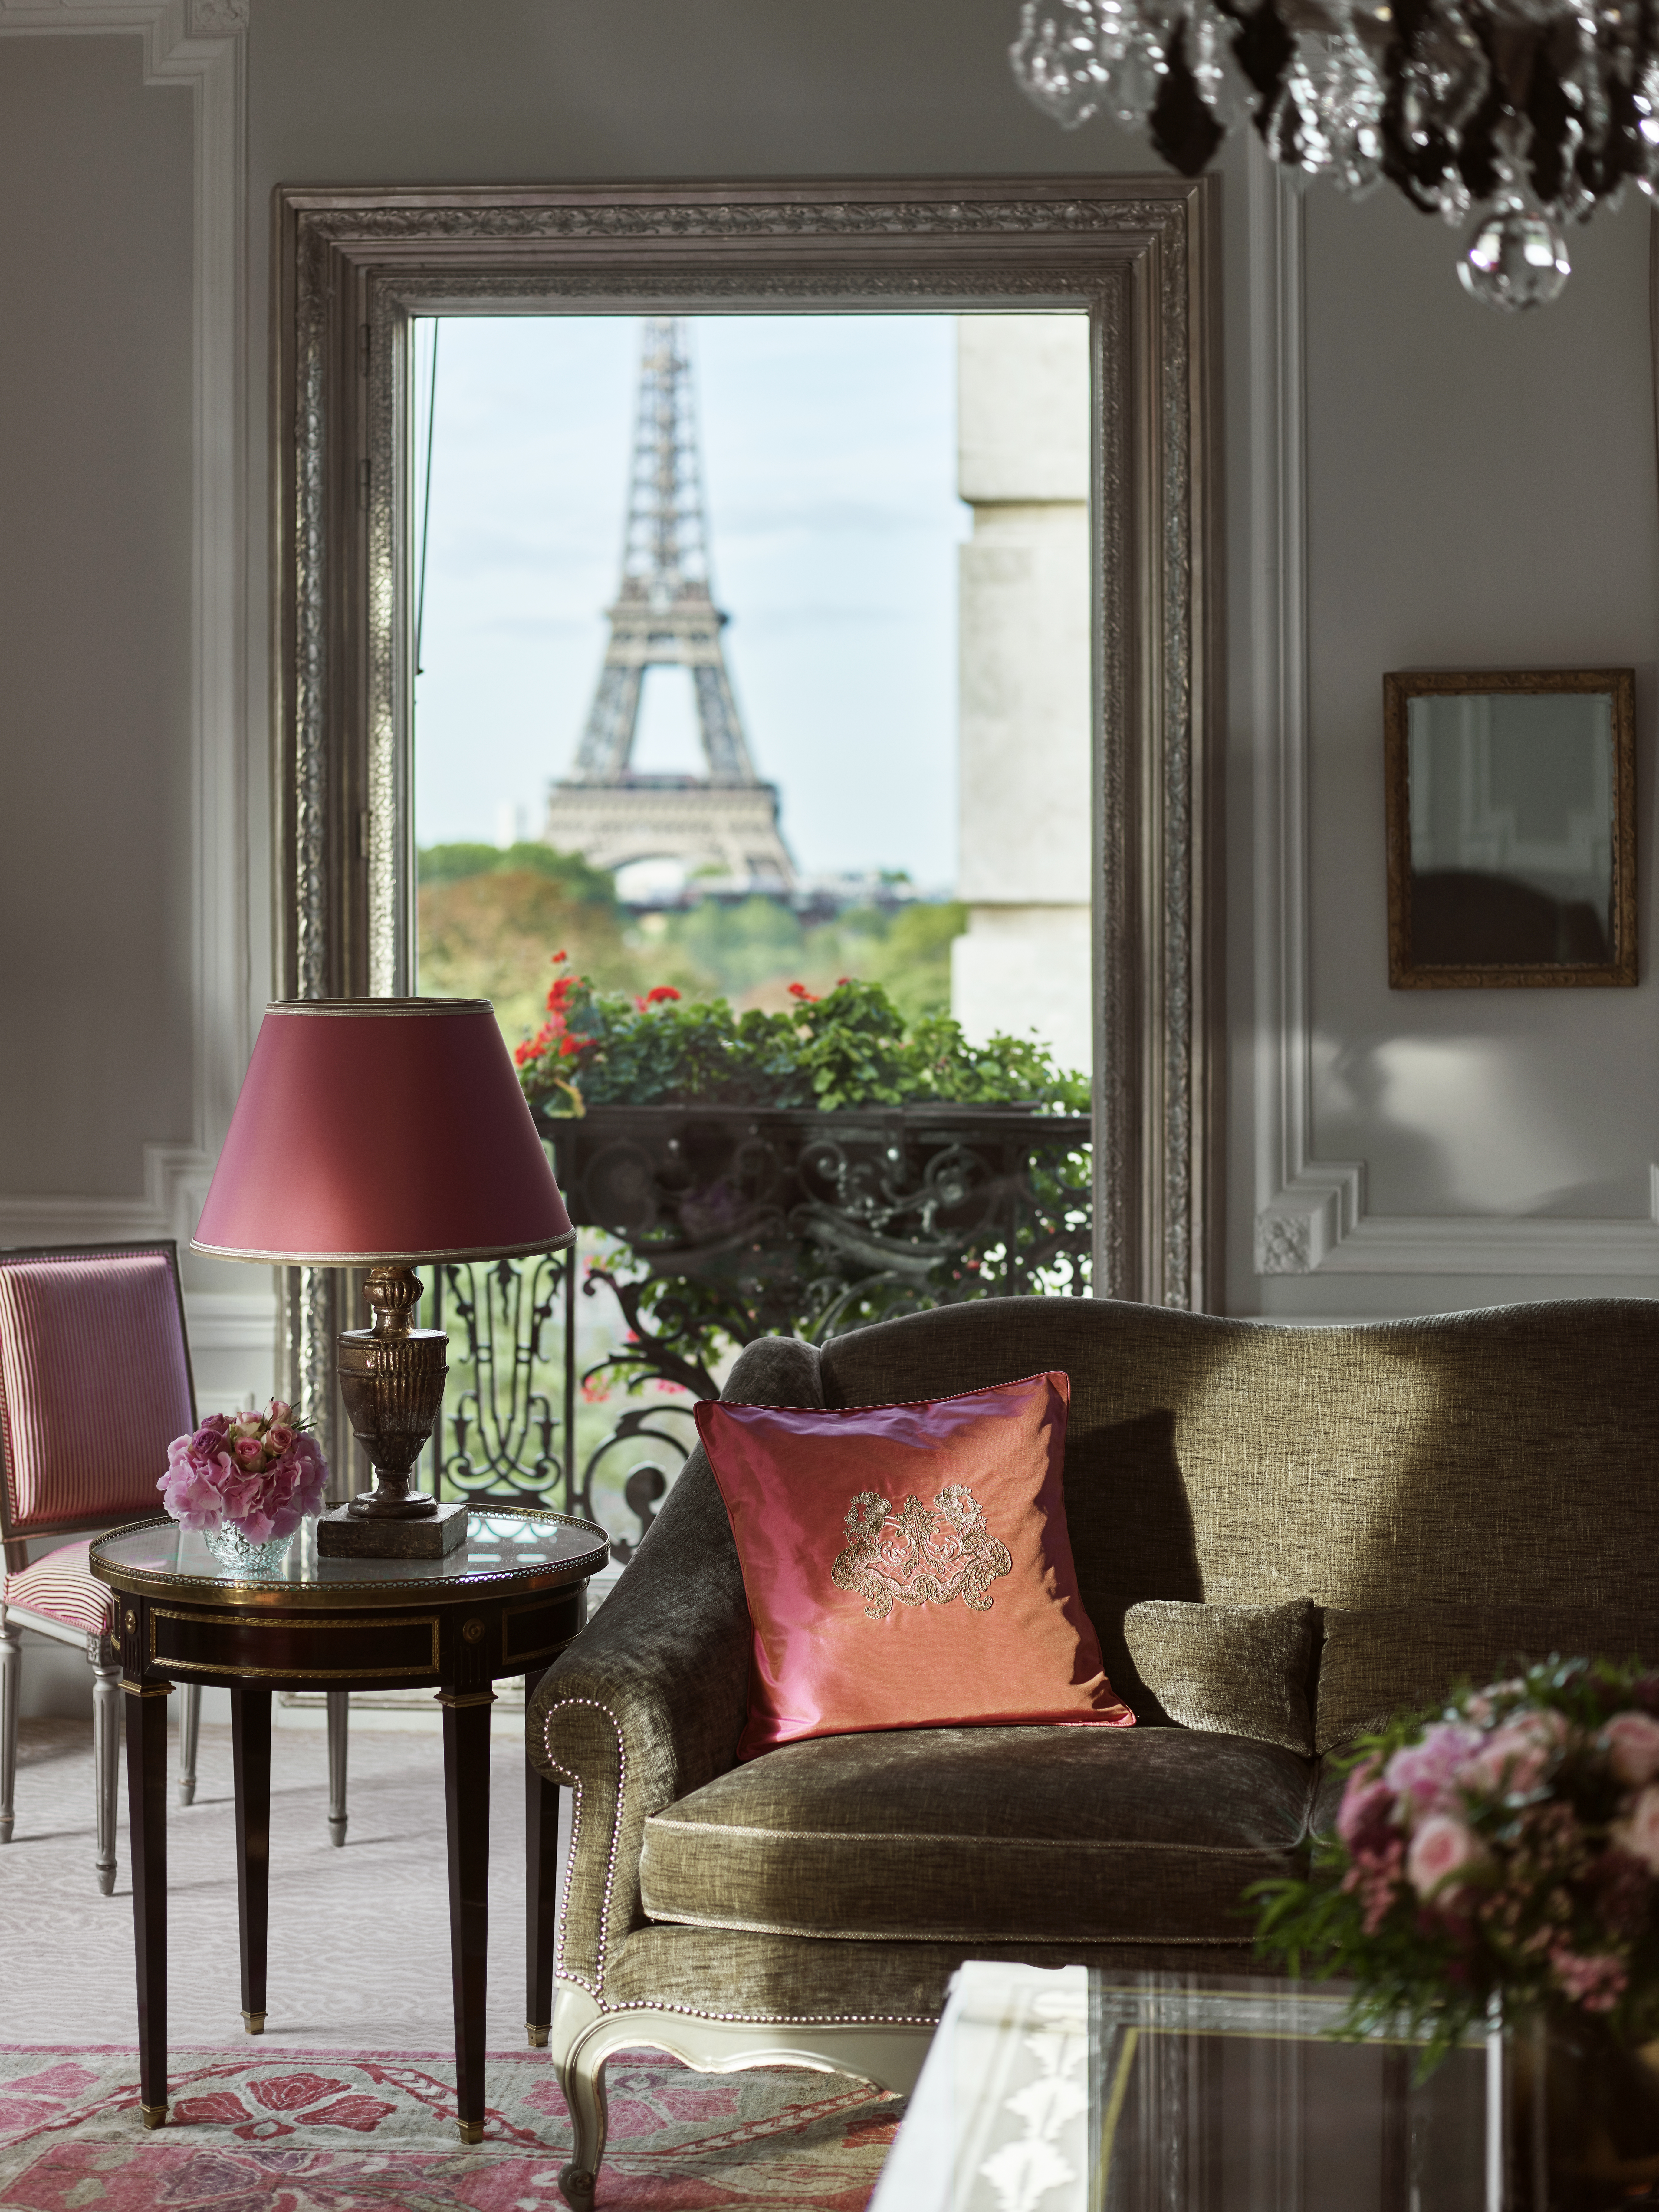 View of Eiffel Tower from the elegant living room of The Plaza Athenee, with a red table lamp, dark green sofa and red cushion